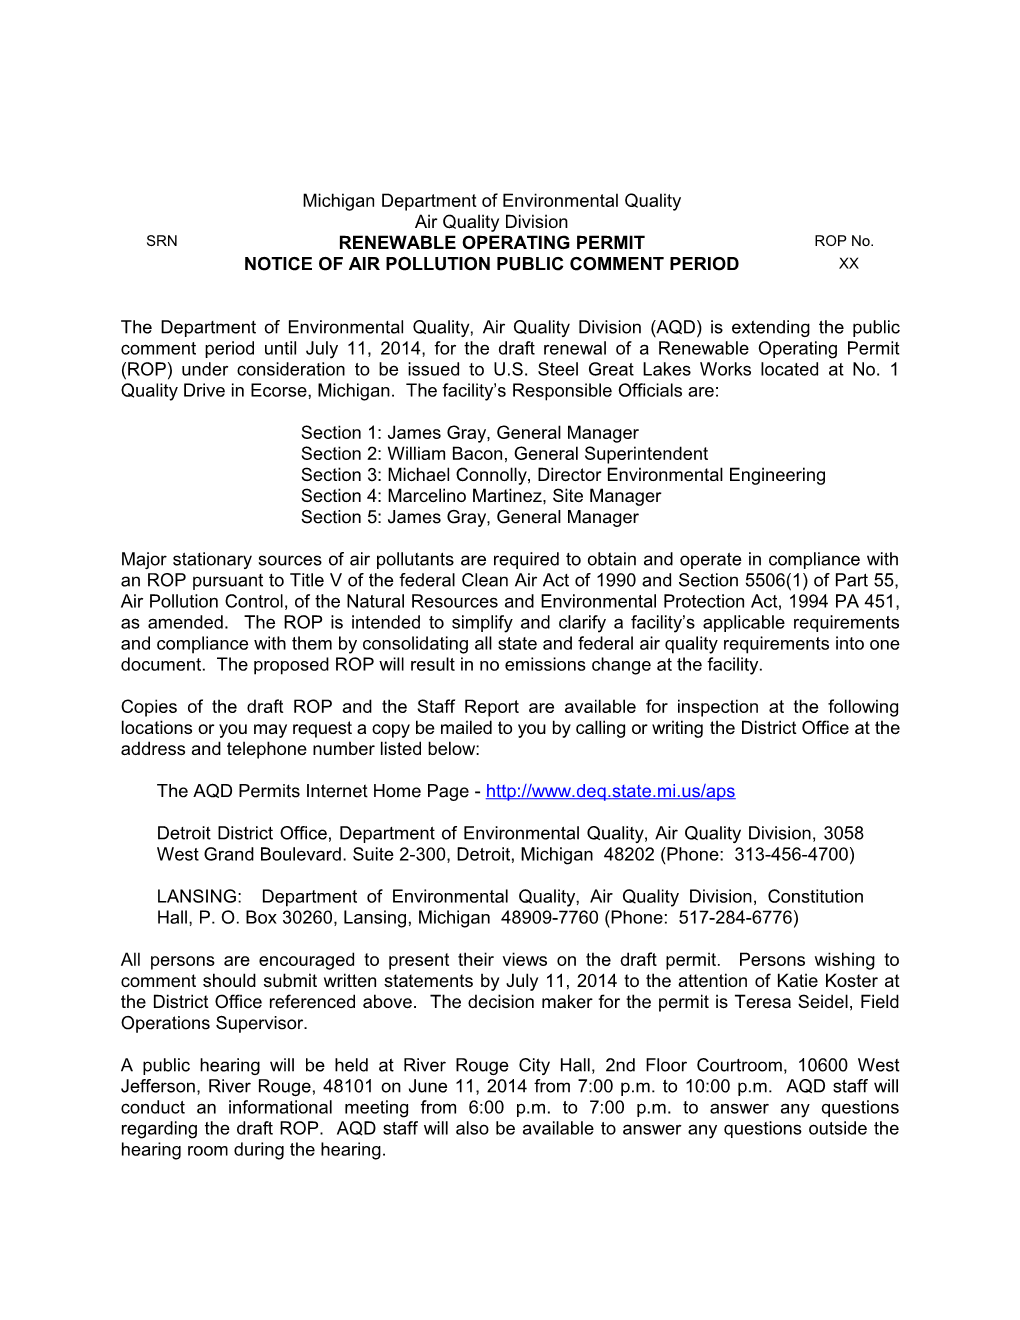 Notice of Air Pollution Public Comment Period for Ro Permit (Unlikely That Public Hearing